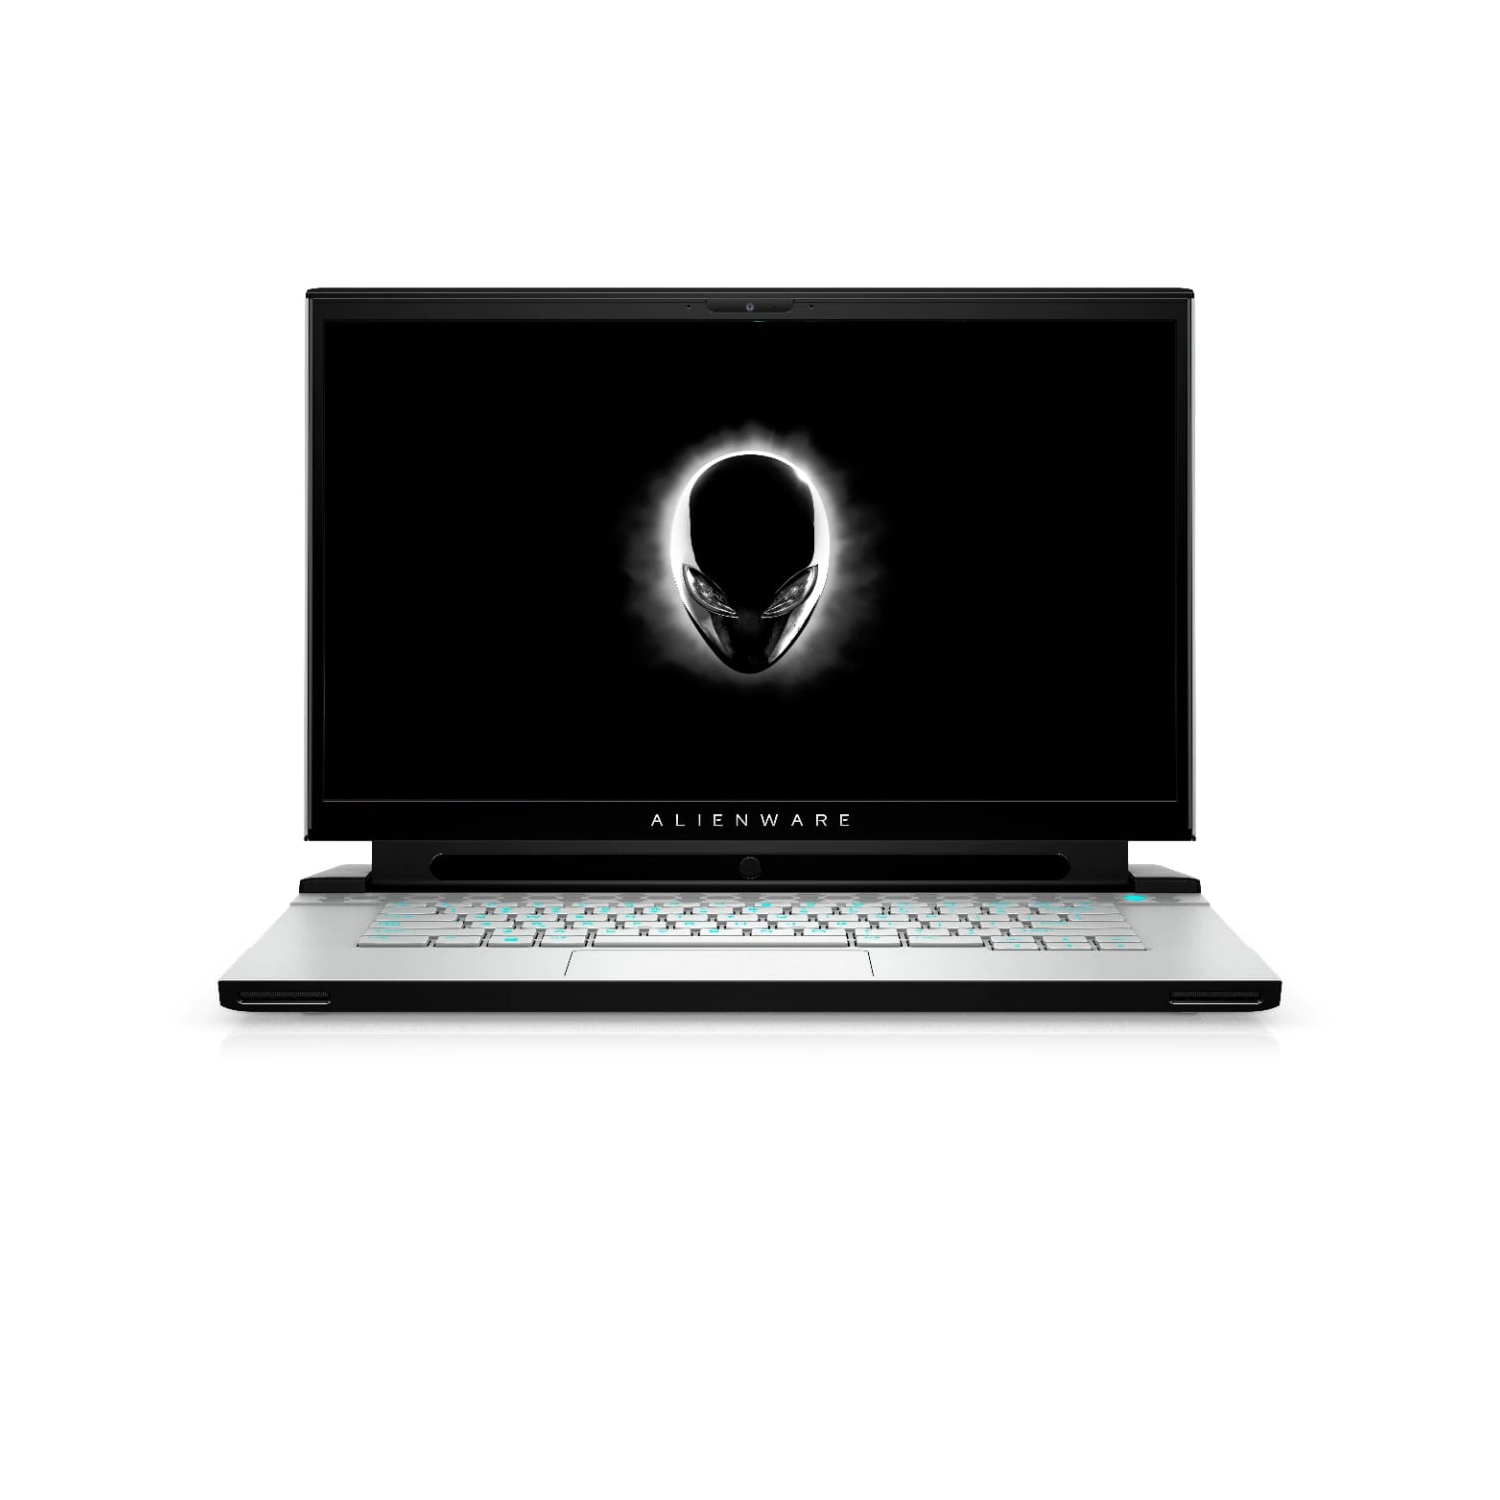 Refurbished (Excellent) - Dell Alienware m15 R3 Gaming Laptop (2020), 15.6" FHD, Core i7, 512GB SSD, 16GB RAM, 1660 Ti, 6 Cores @ 5 GHz, 10th Gen CPU Certified